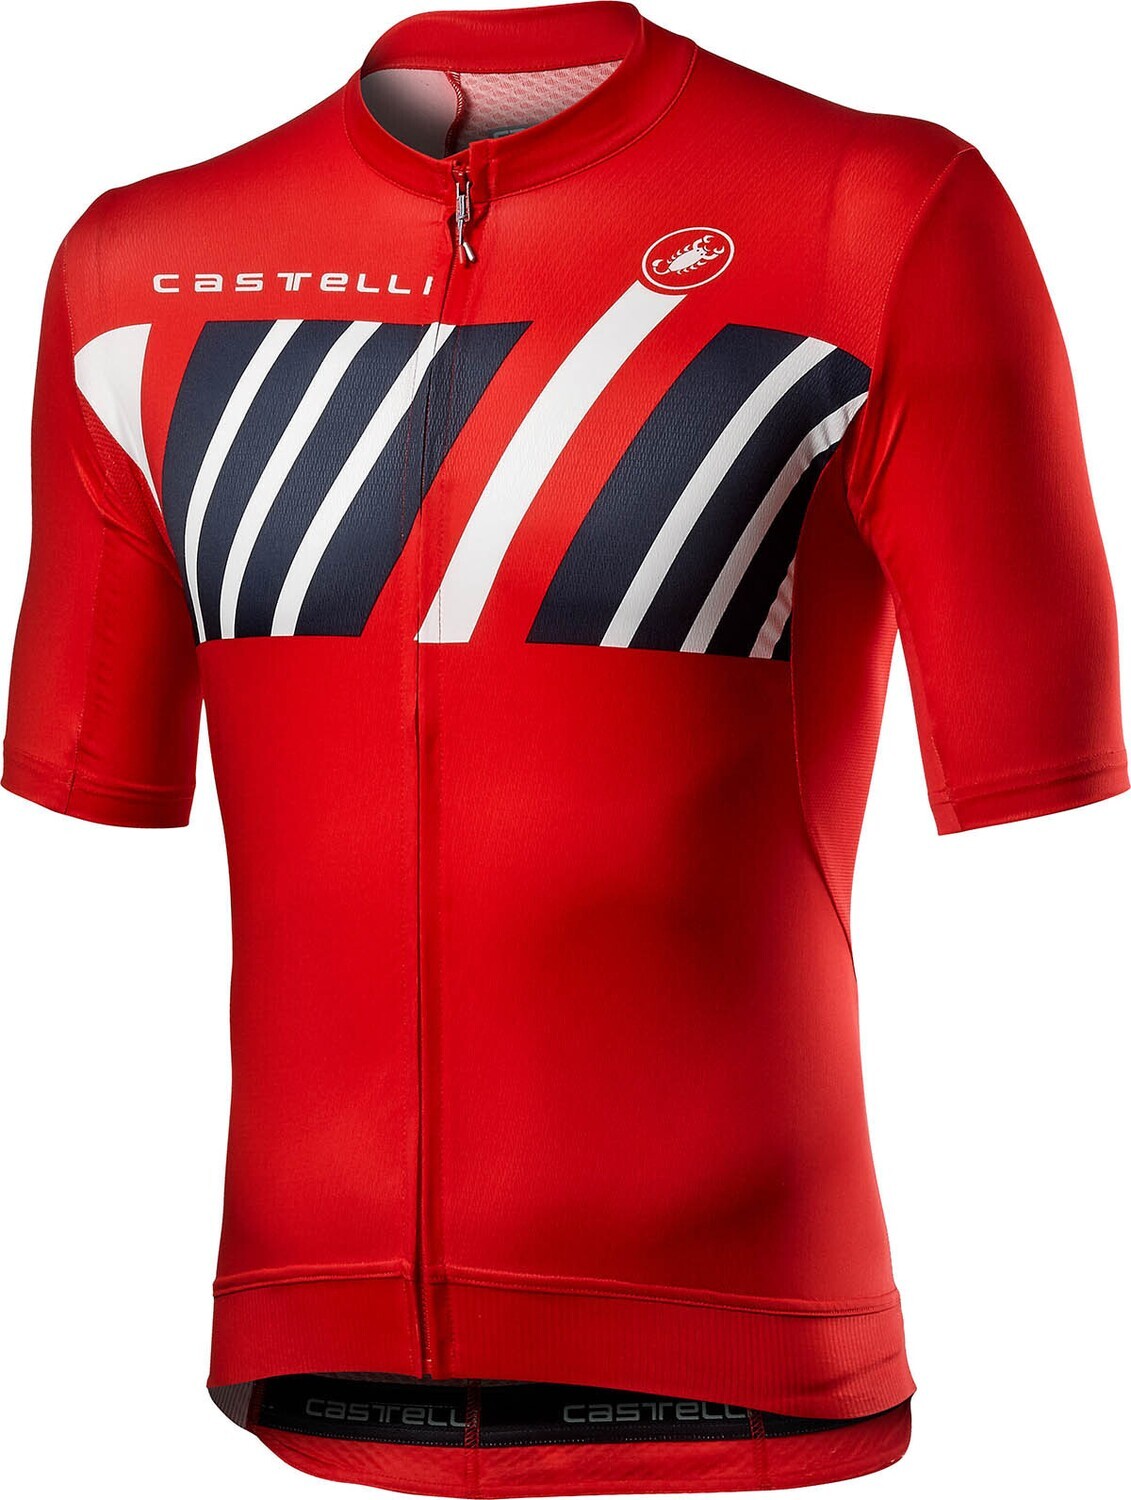 Castelli Hors Categorie Jersey (Red)